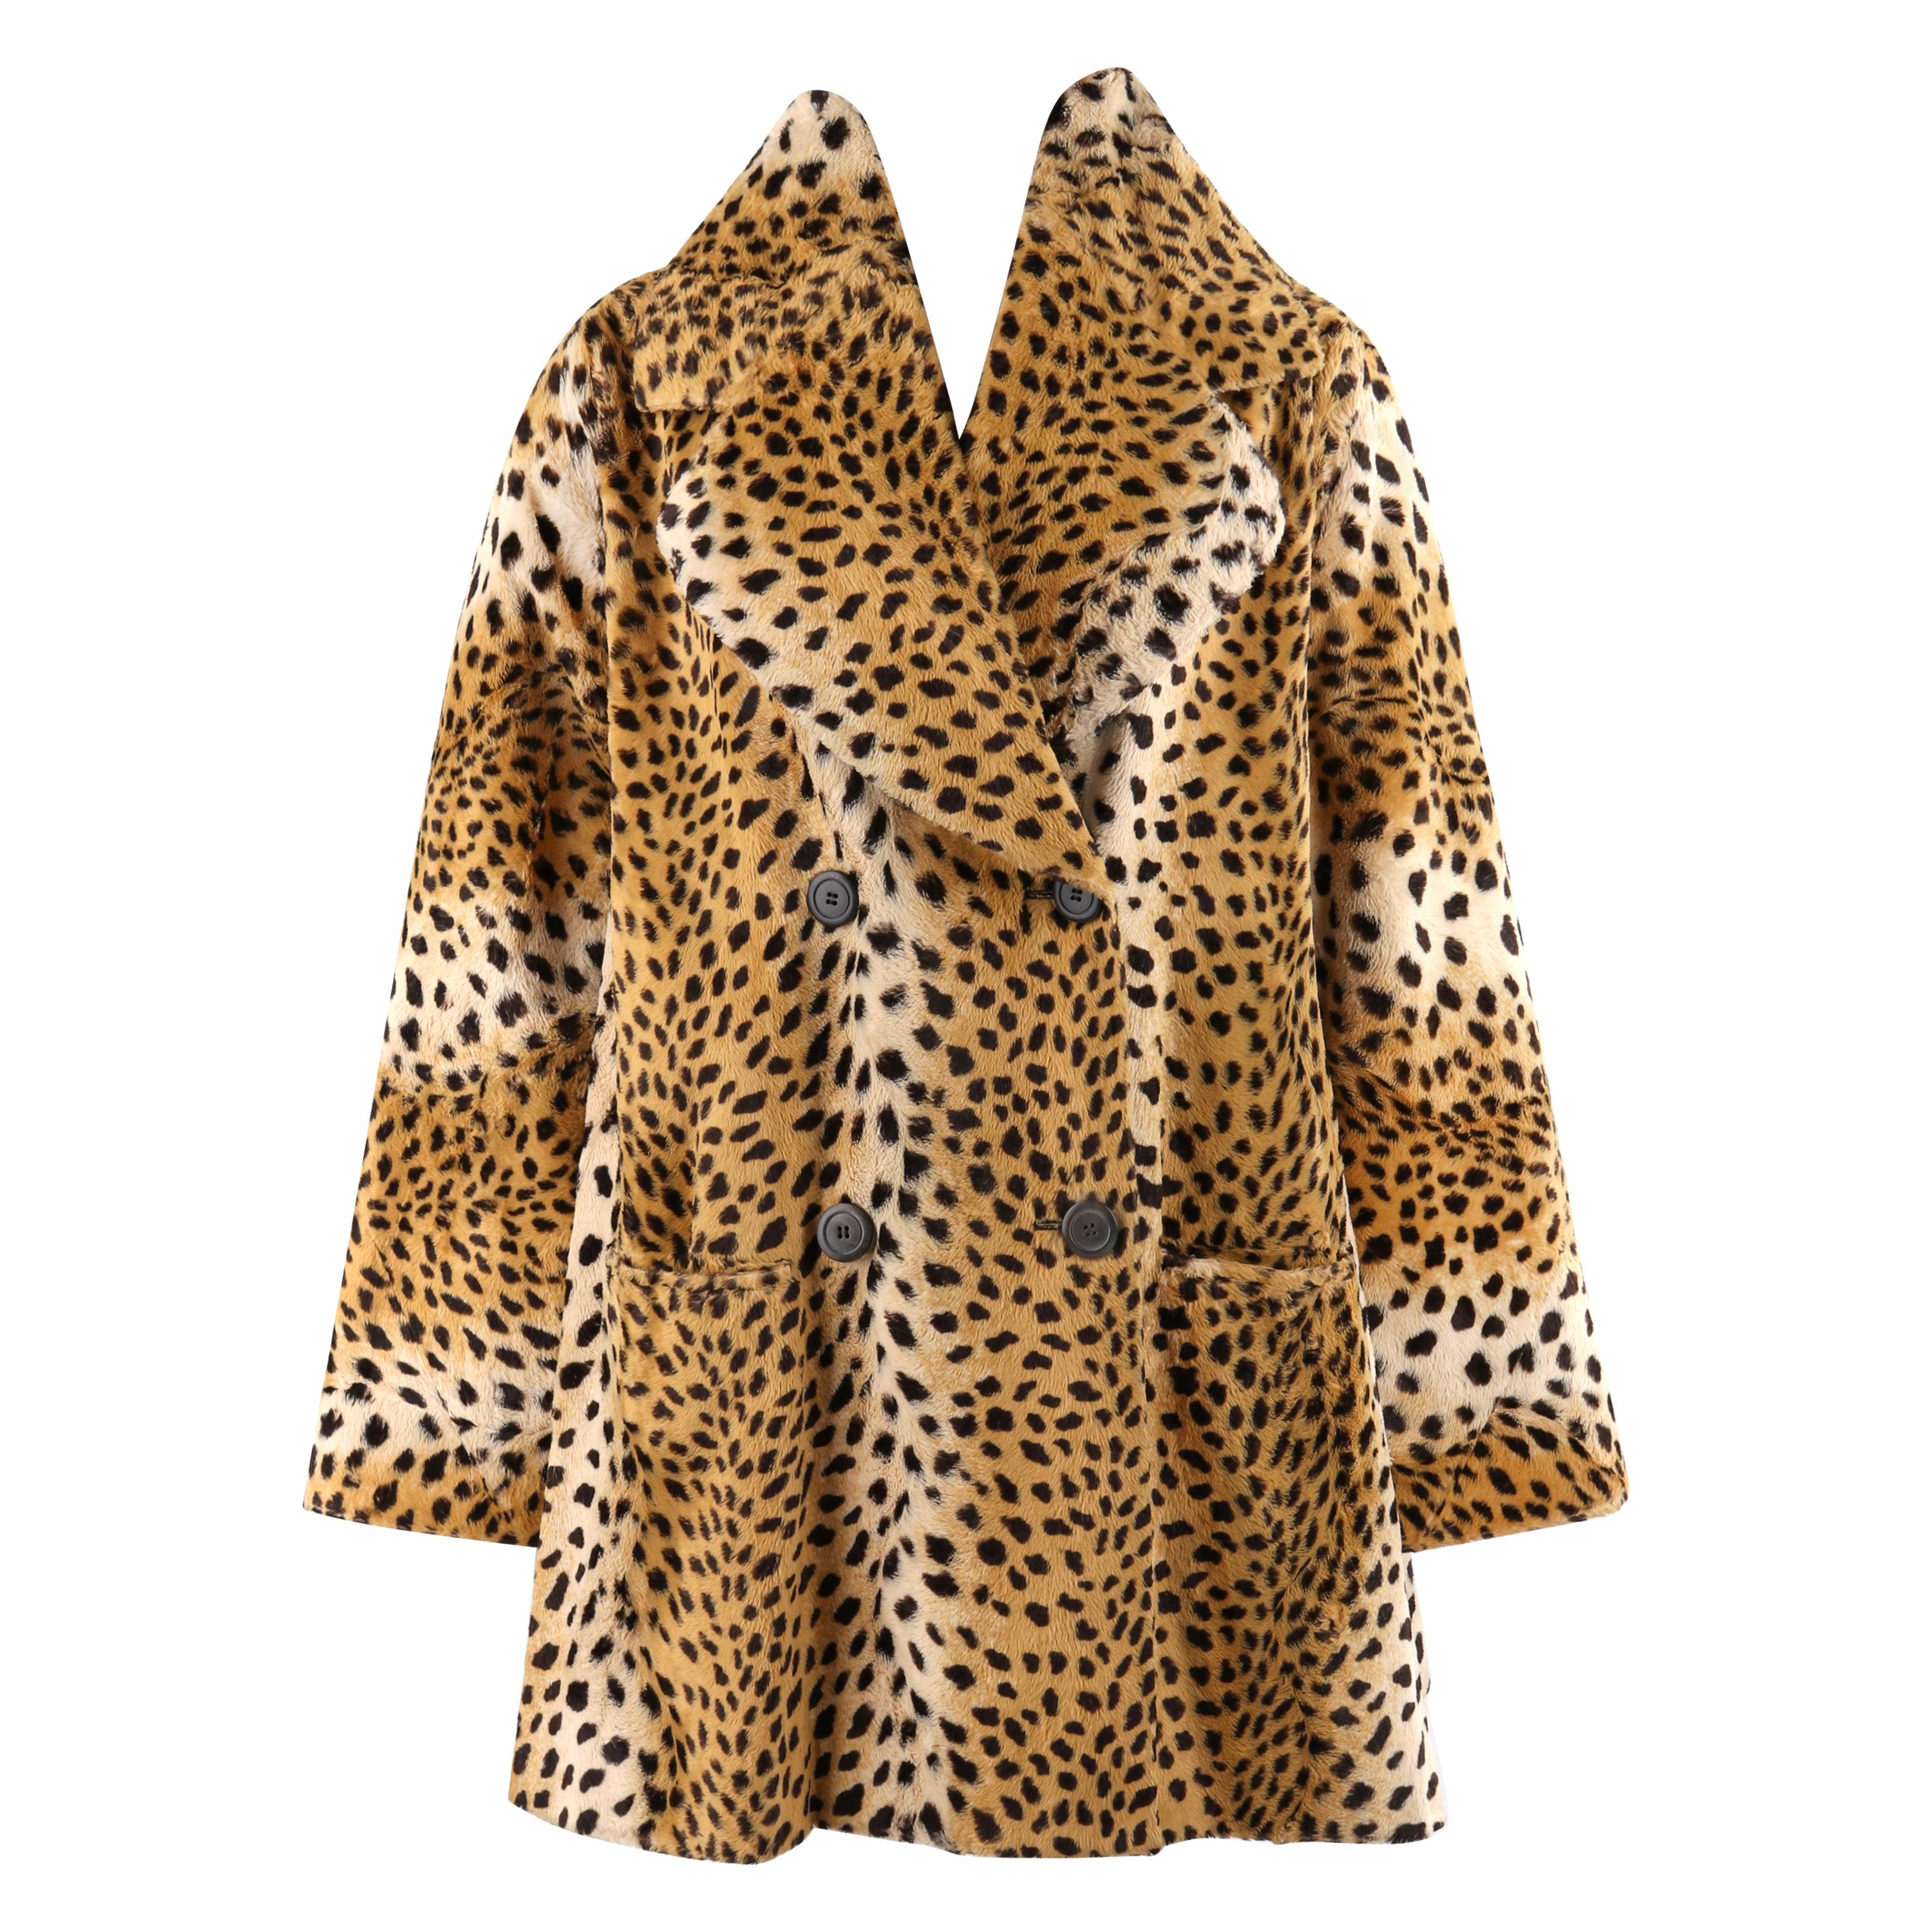 GIVENCHY COUTURE A/W 1997 ALEXANDER McQUEEN Cheetah Print Faux Fur Paneled Coat For Sale